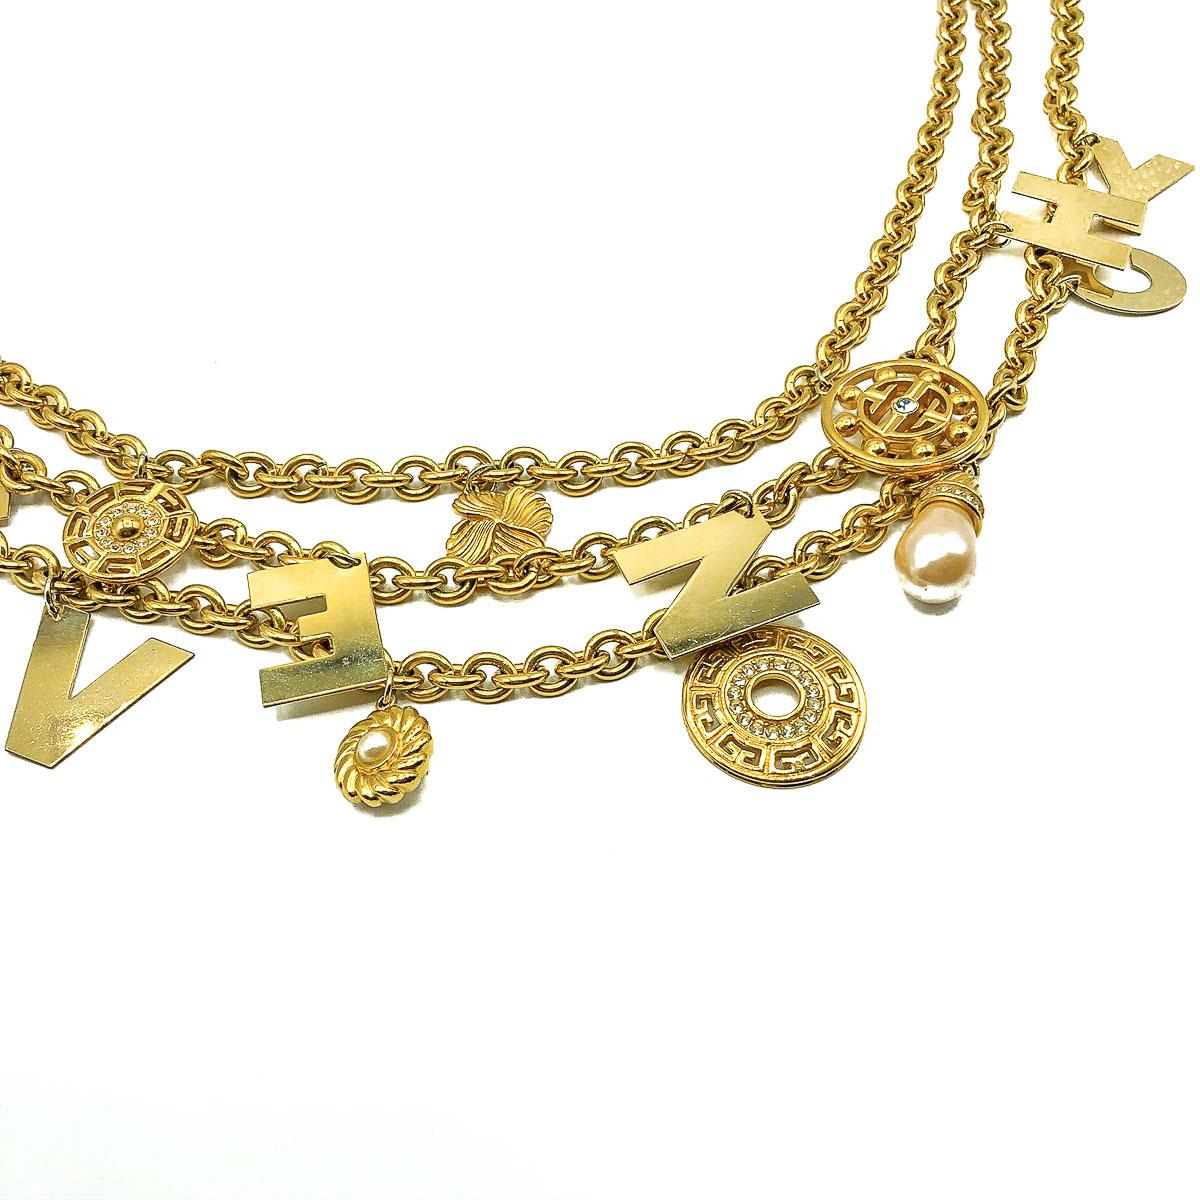 Women's or Men's Vintage Givenchy Standout Runway Logo Charm Chain Collar 1980s